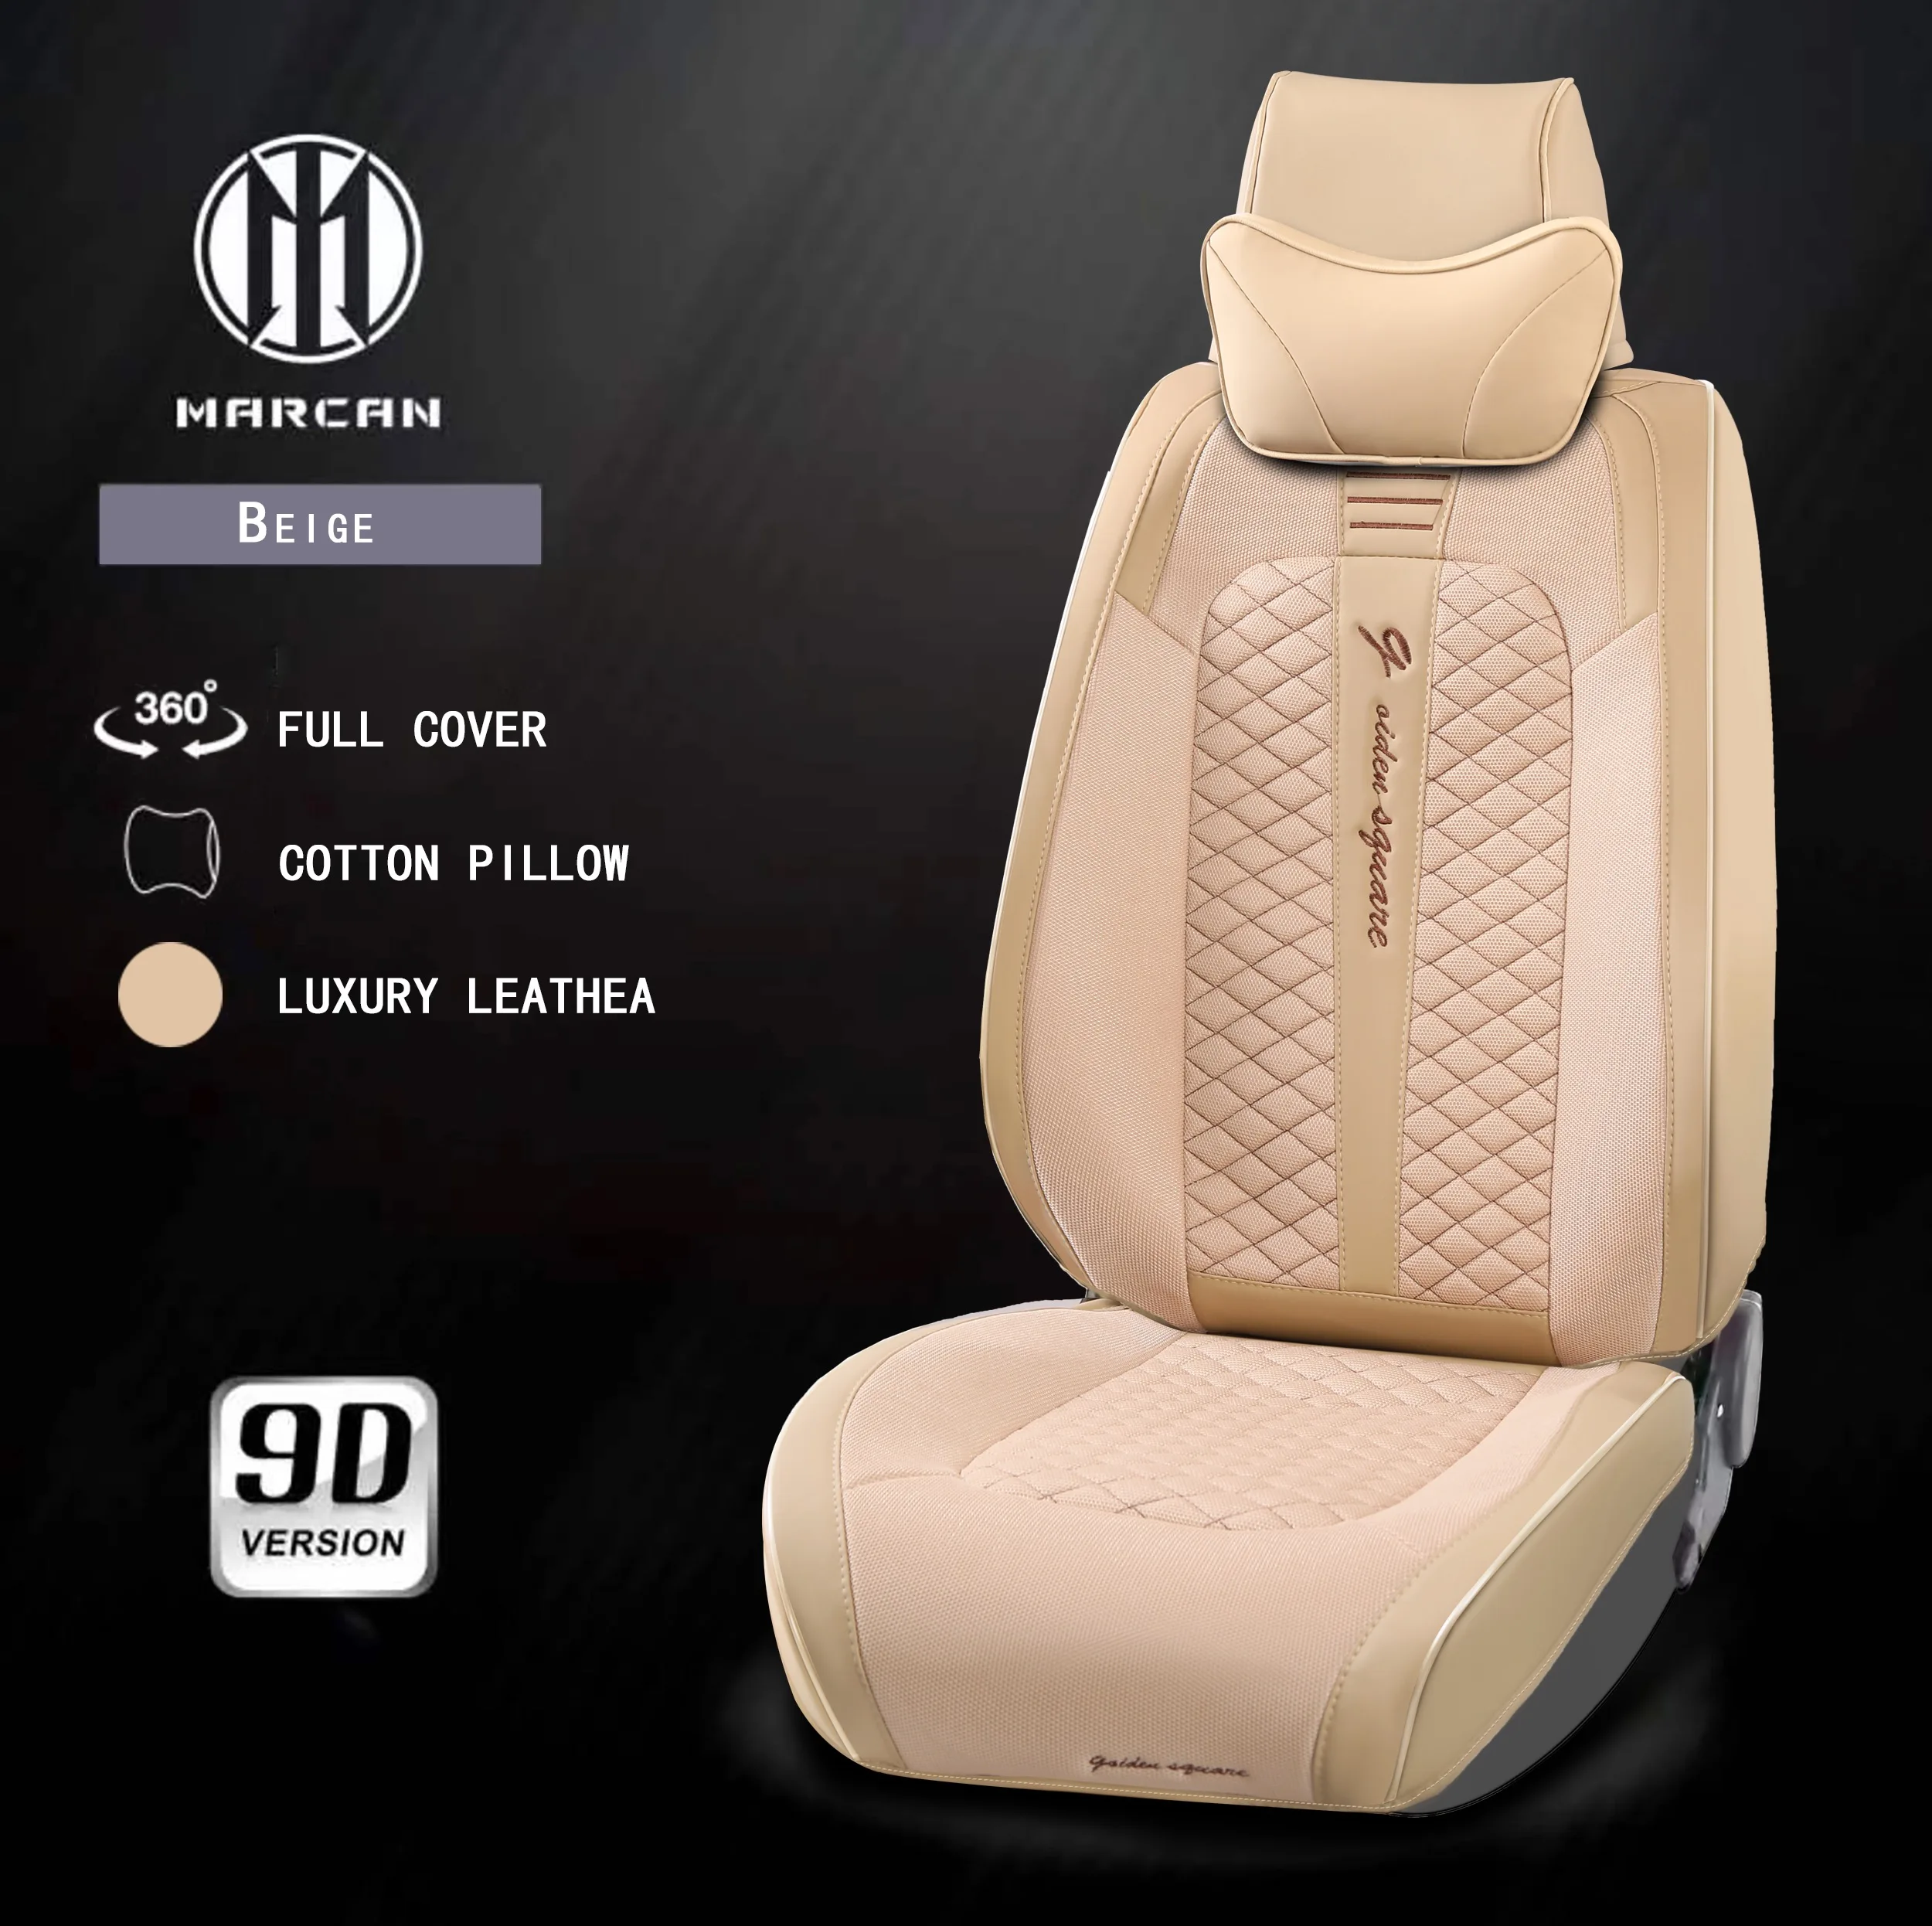 Auto Seat Cushion Leather Seat Cover Car Seat Protector Cushion seat Car  Front Seats Covers luxury car seat Cape 5 seats - AliExpress